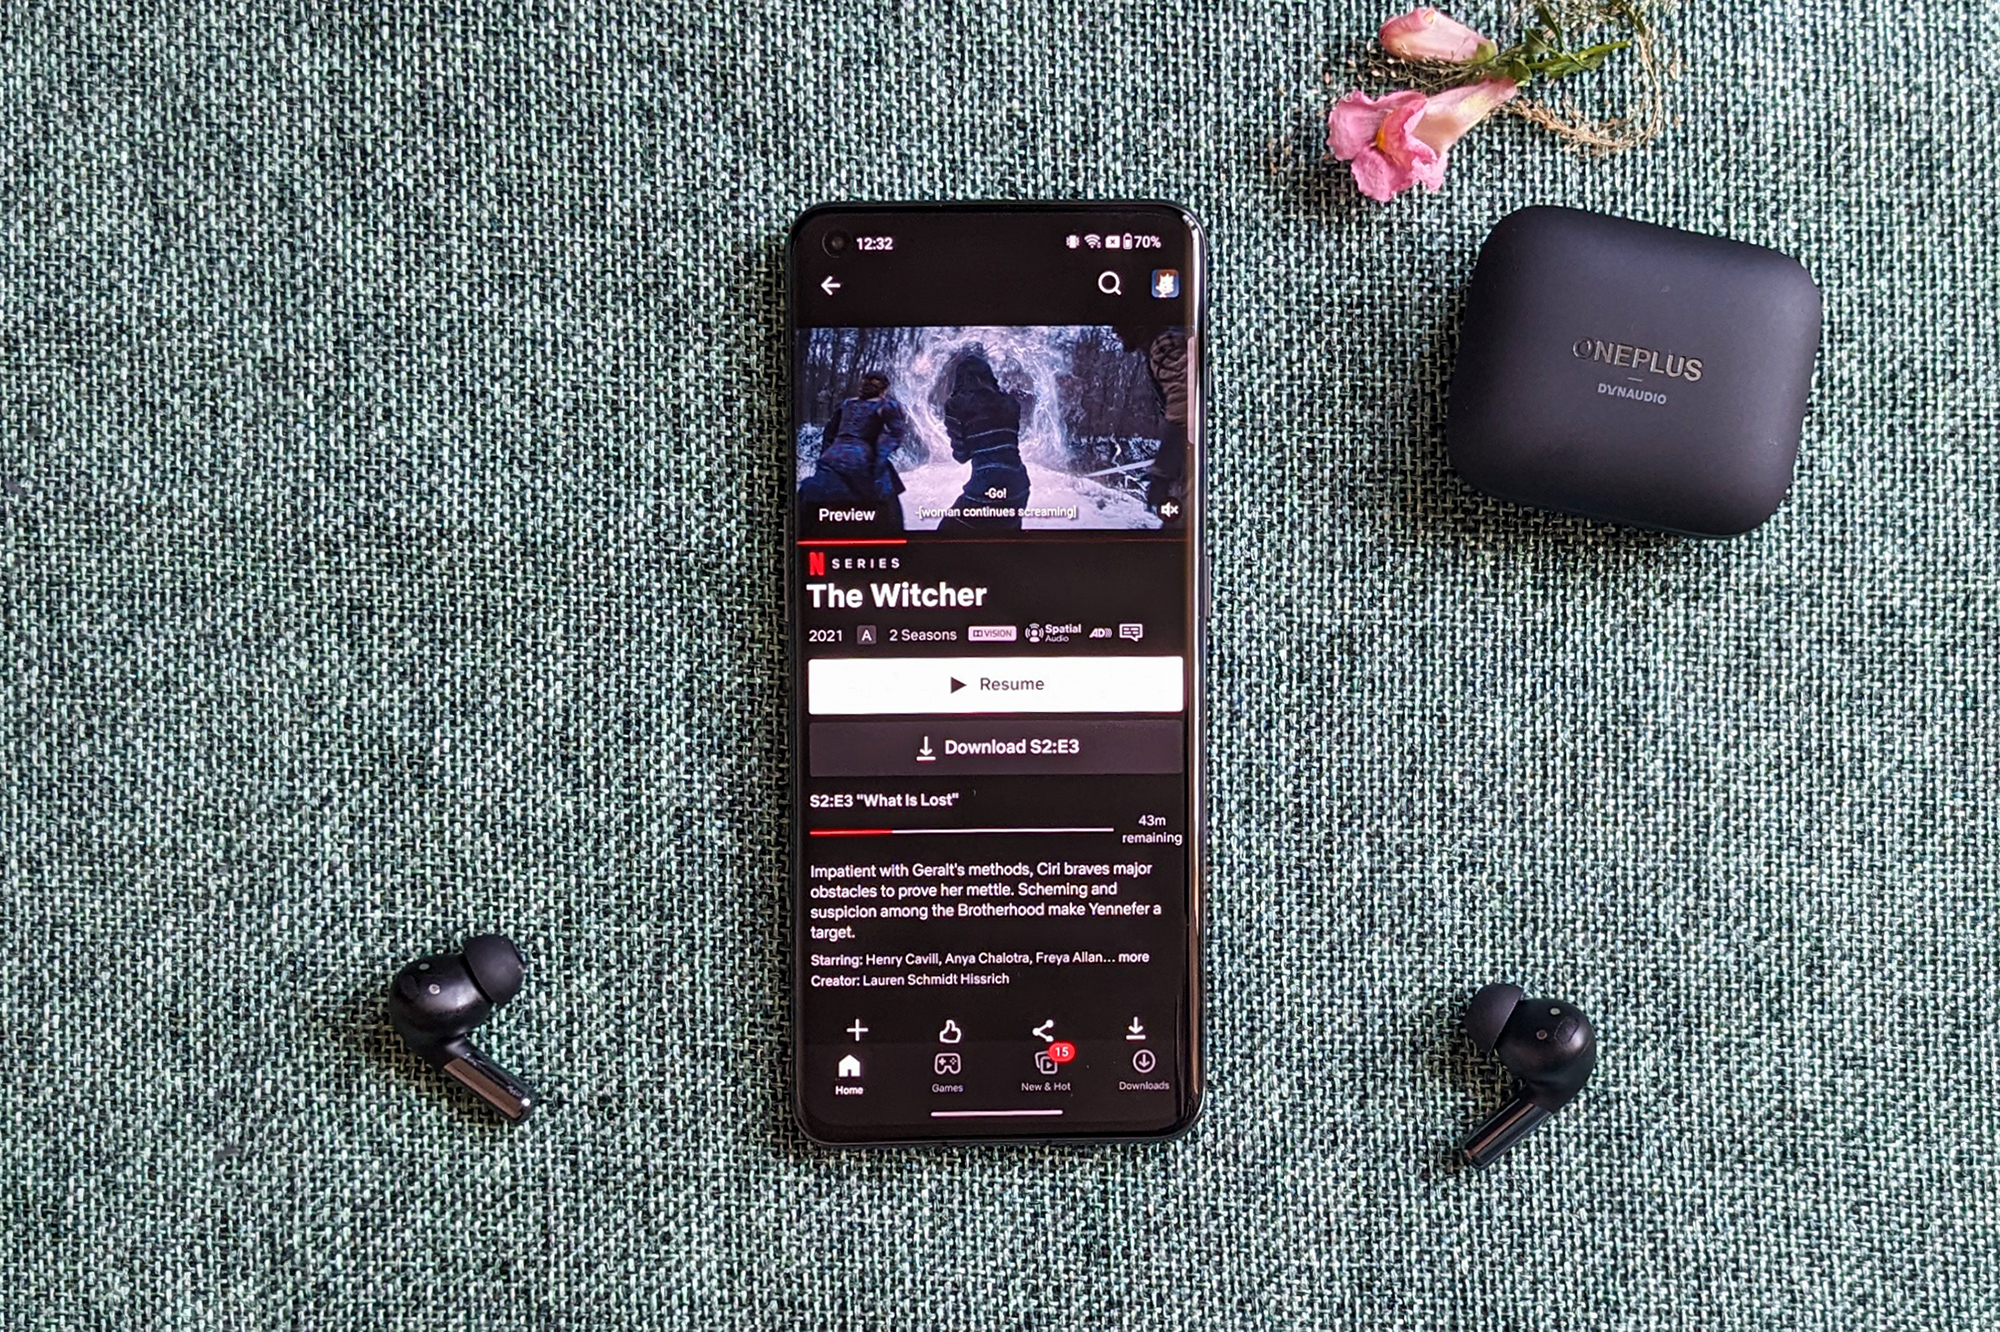 OnePlus Buds Pro 2 - Arbor Green - Audiophile-Grade Sound Quality  Co-Created with Dynaudio, Best-in-Class ANC, Immersive Spatial Audio, Up to  39 Hour